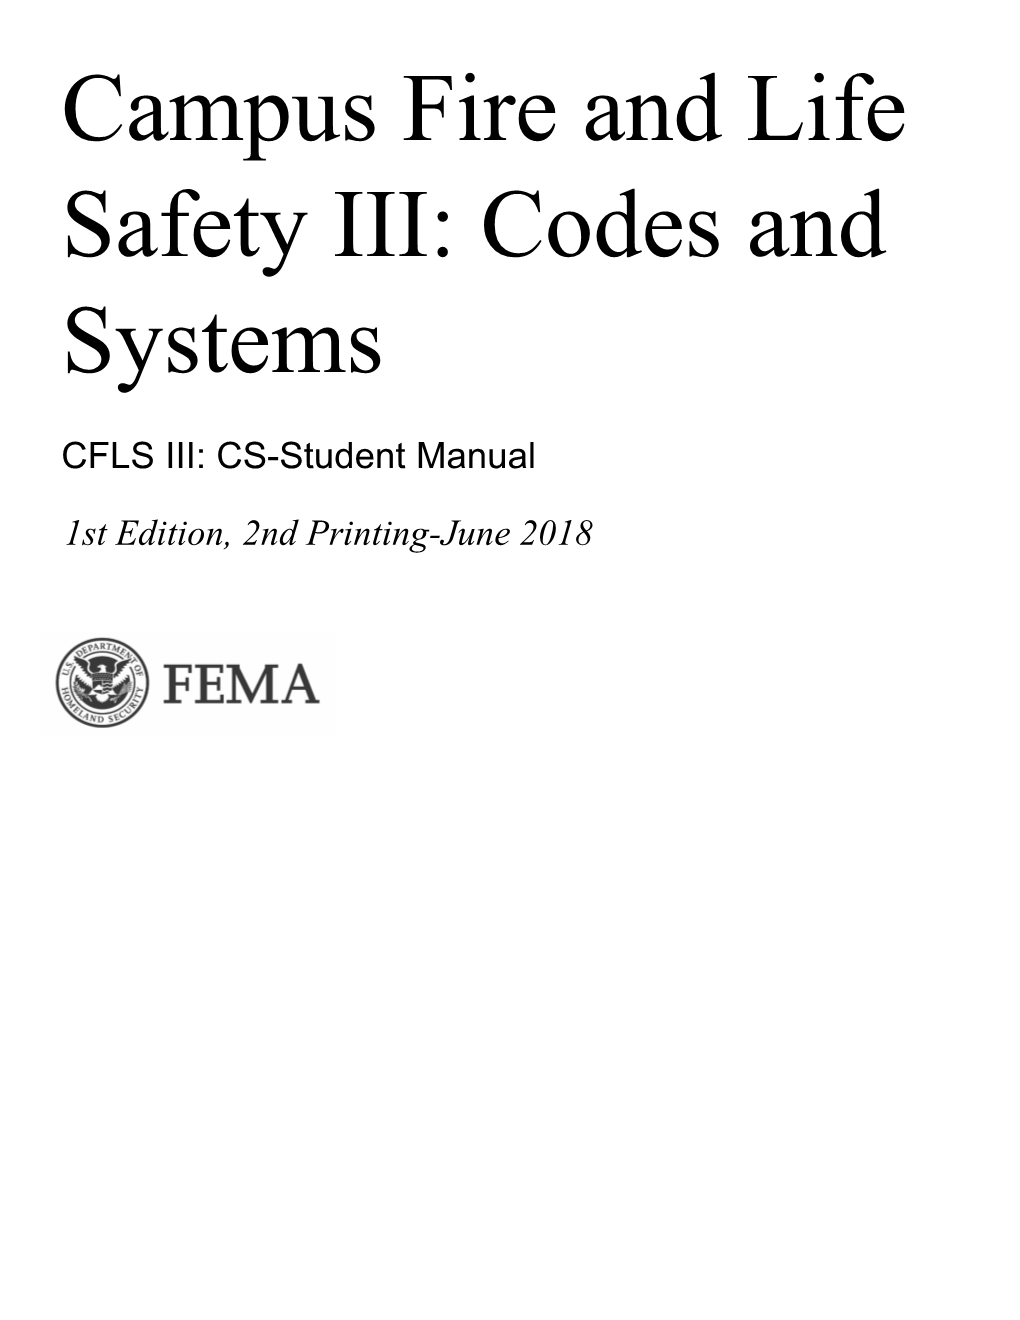 Campus Fire and Life Safety III: Codes and Systems-Student Manual